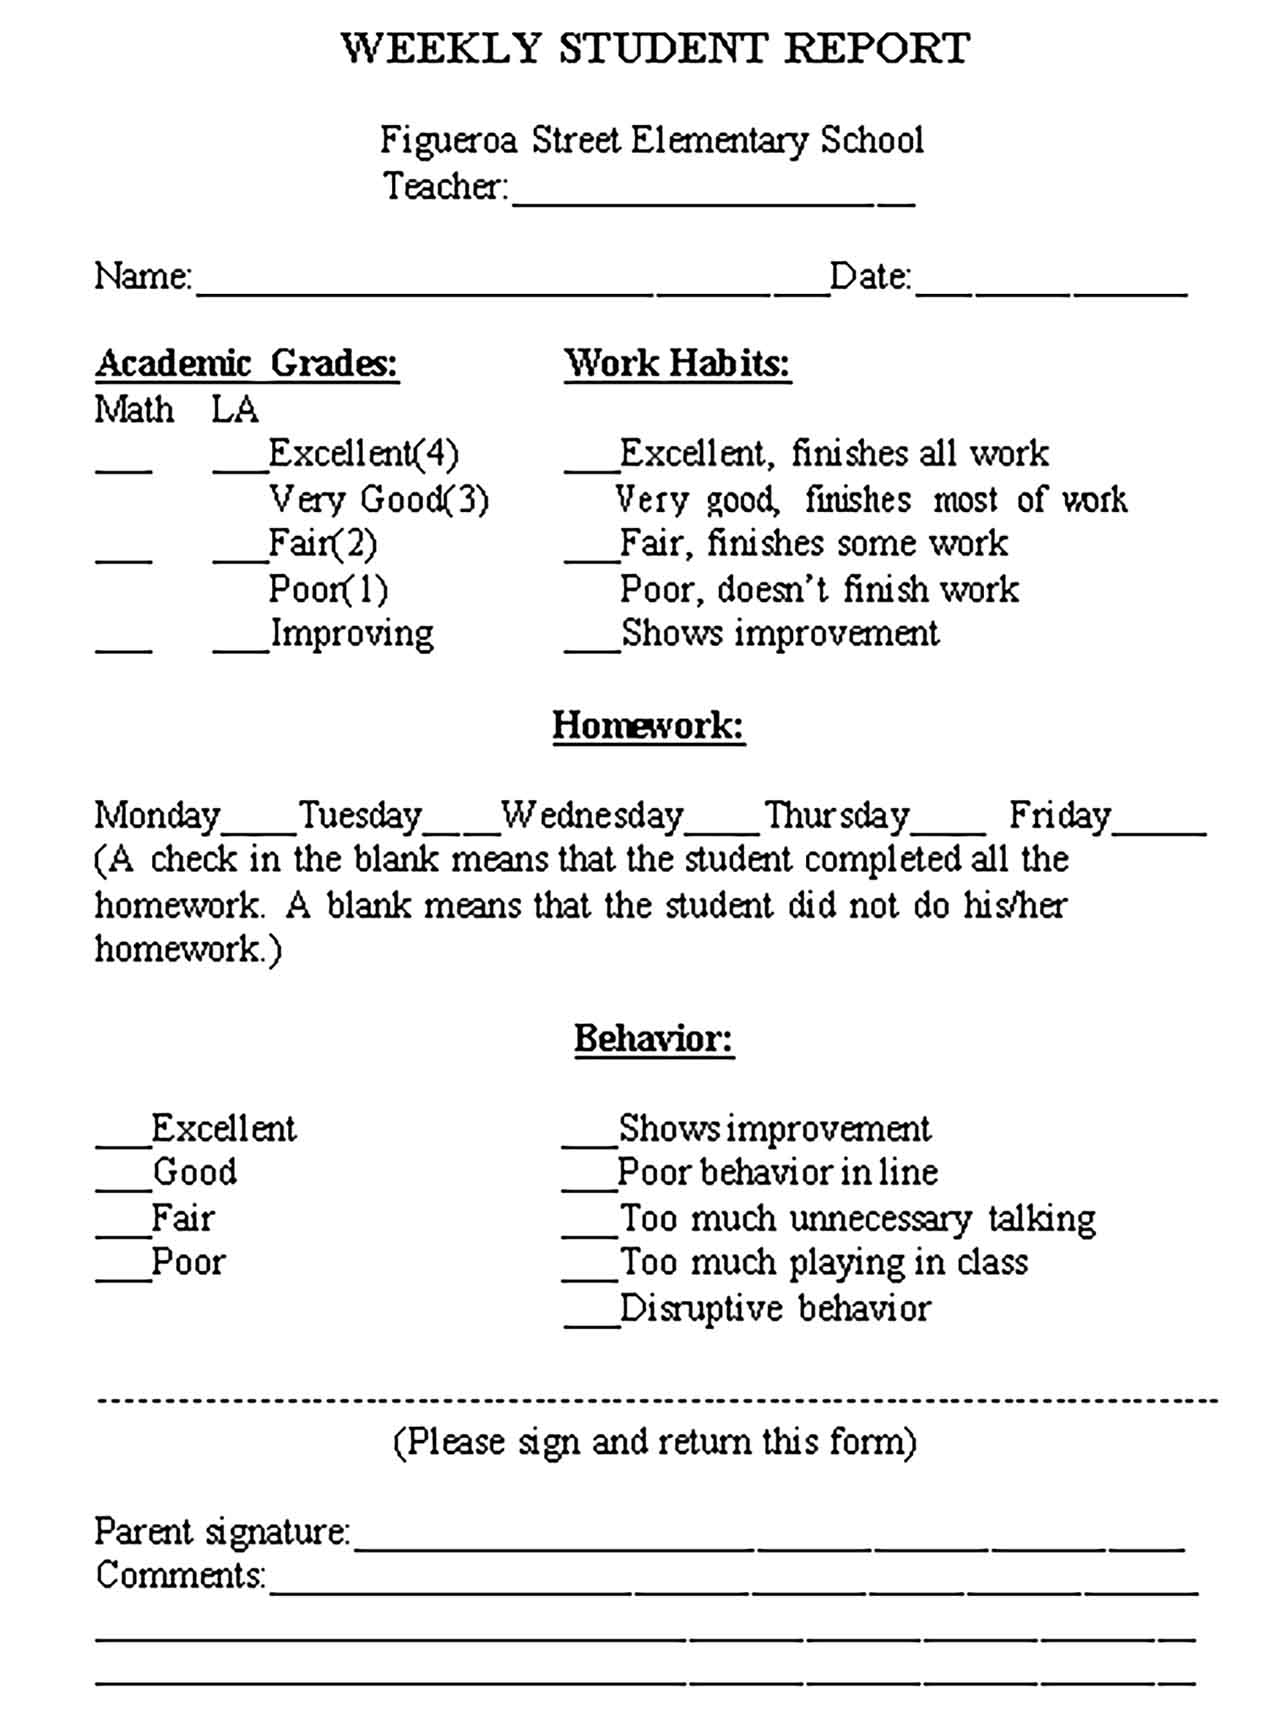 Template Student Weekly Report Form Sample